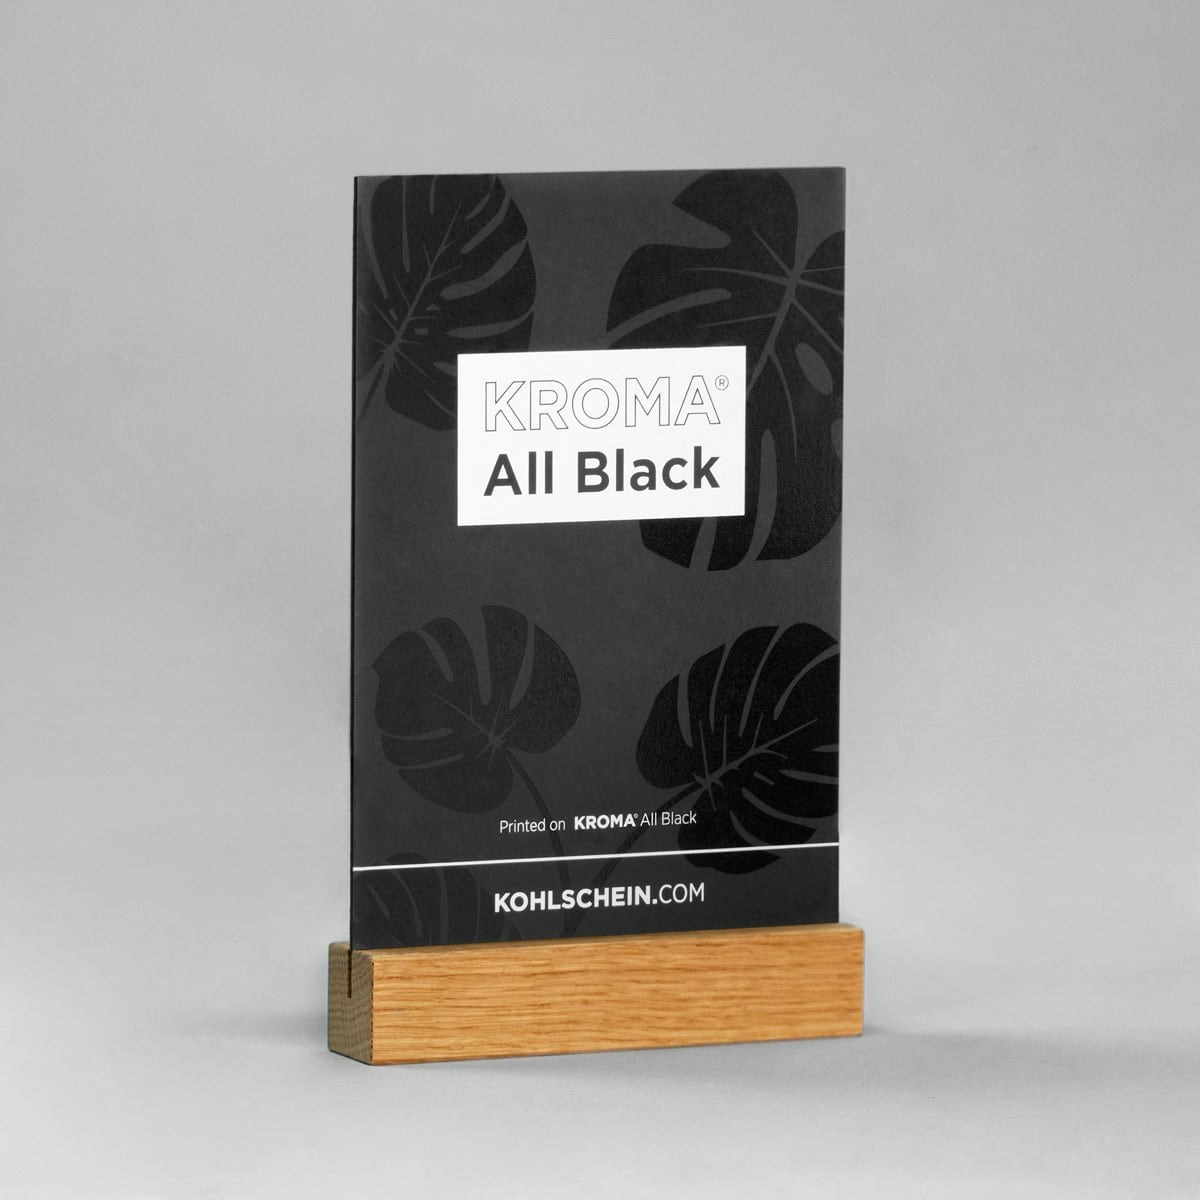 Sign / table display made of KROMA All Black